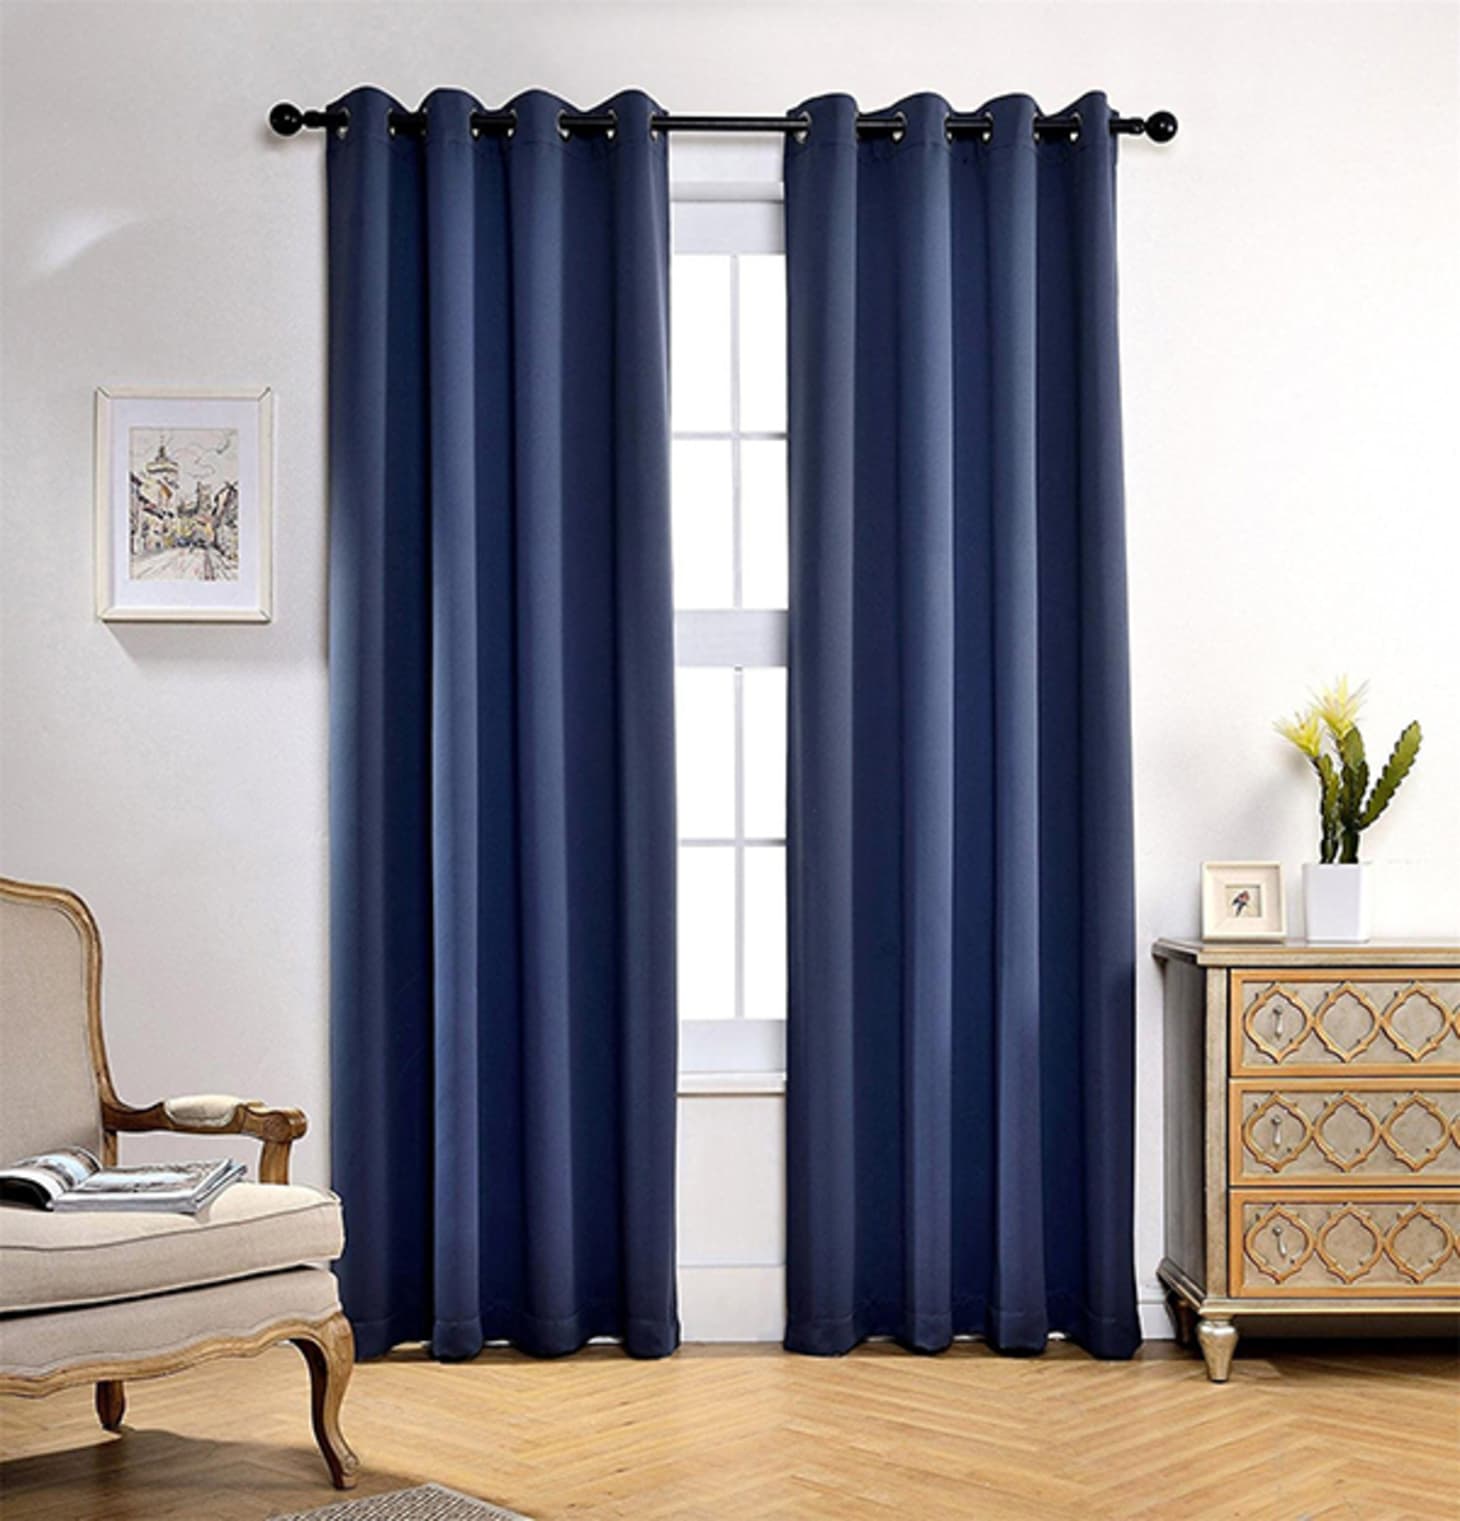 Best Insulated Blackout Curtains | Apartment Therapy